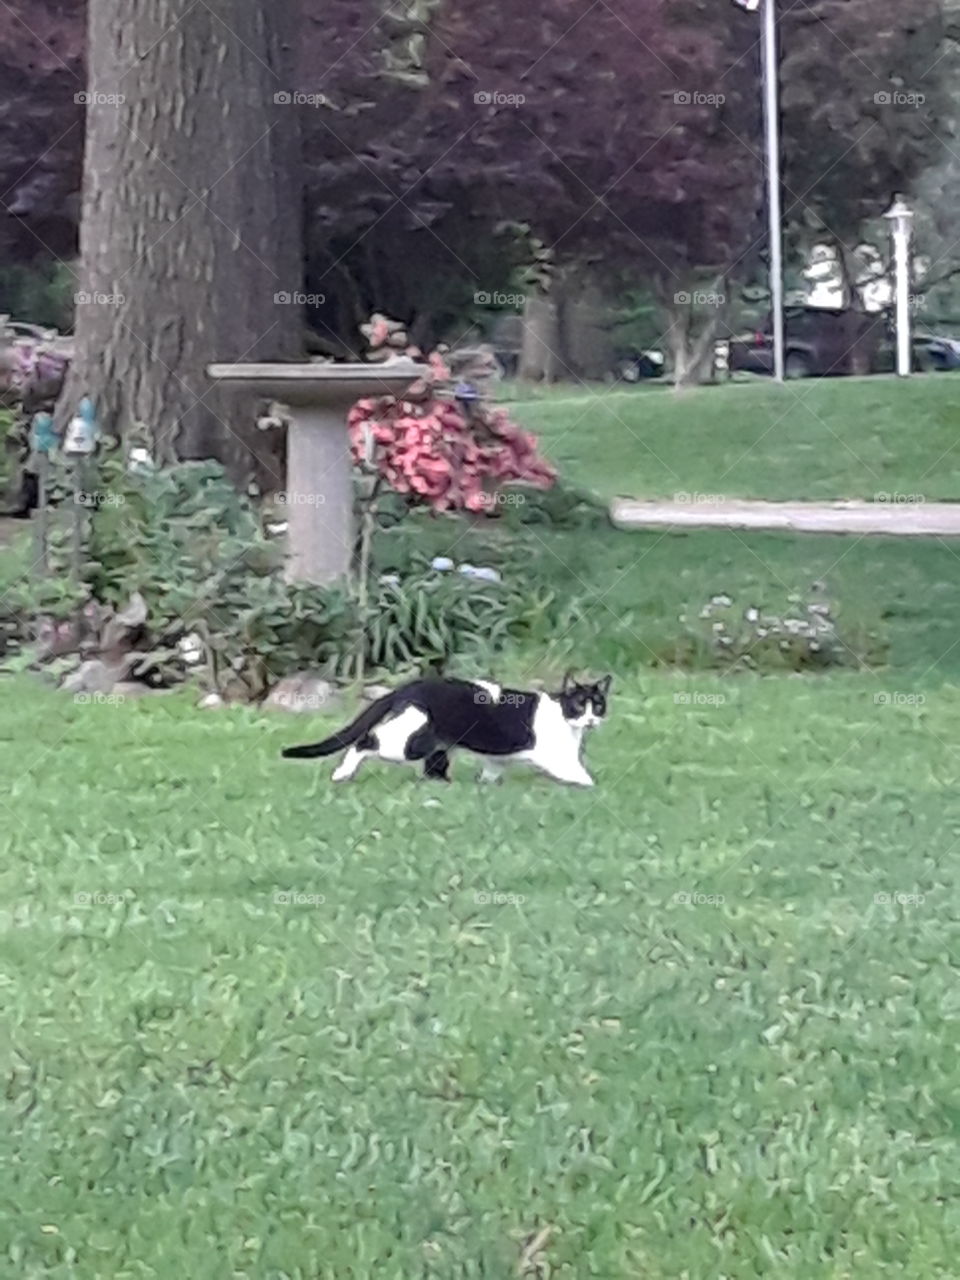 Black and white cat on the green lawn with bird bath